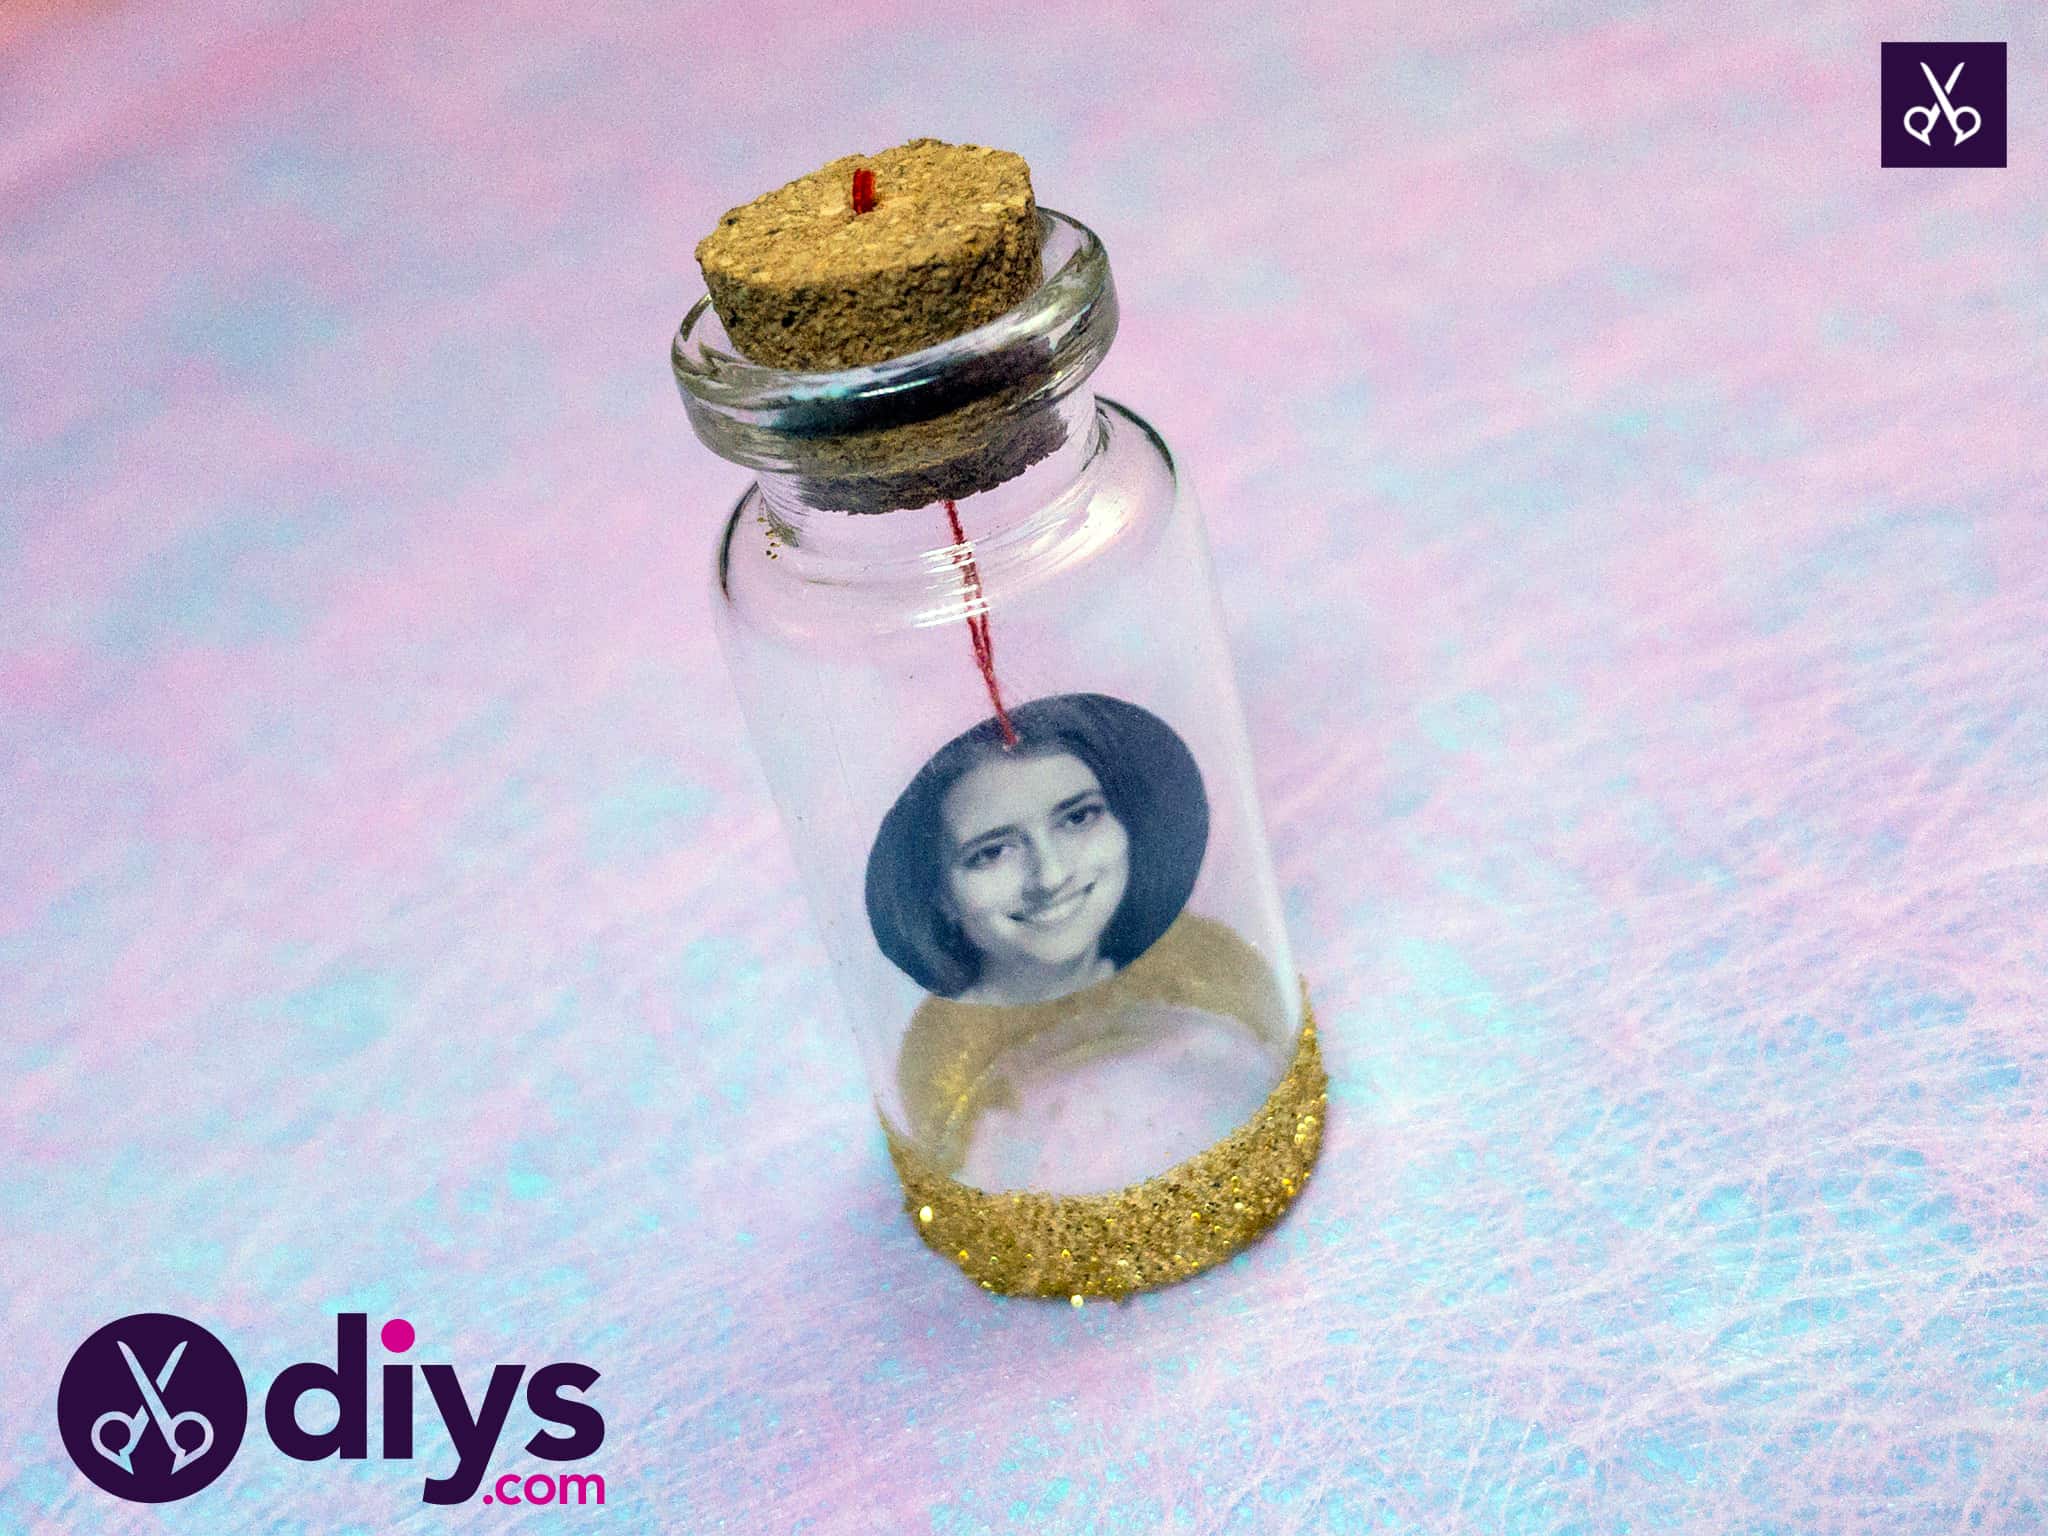 How to make a tiny photo in a bottle diy